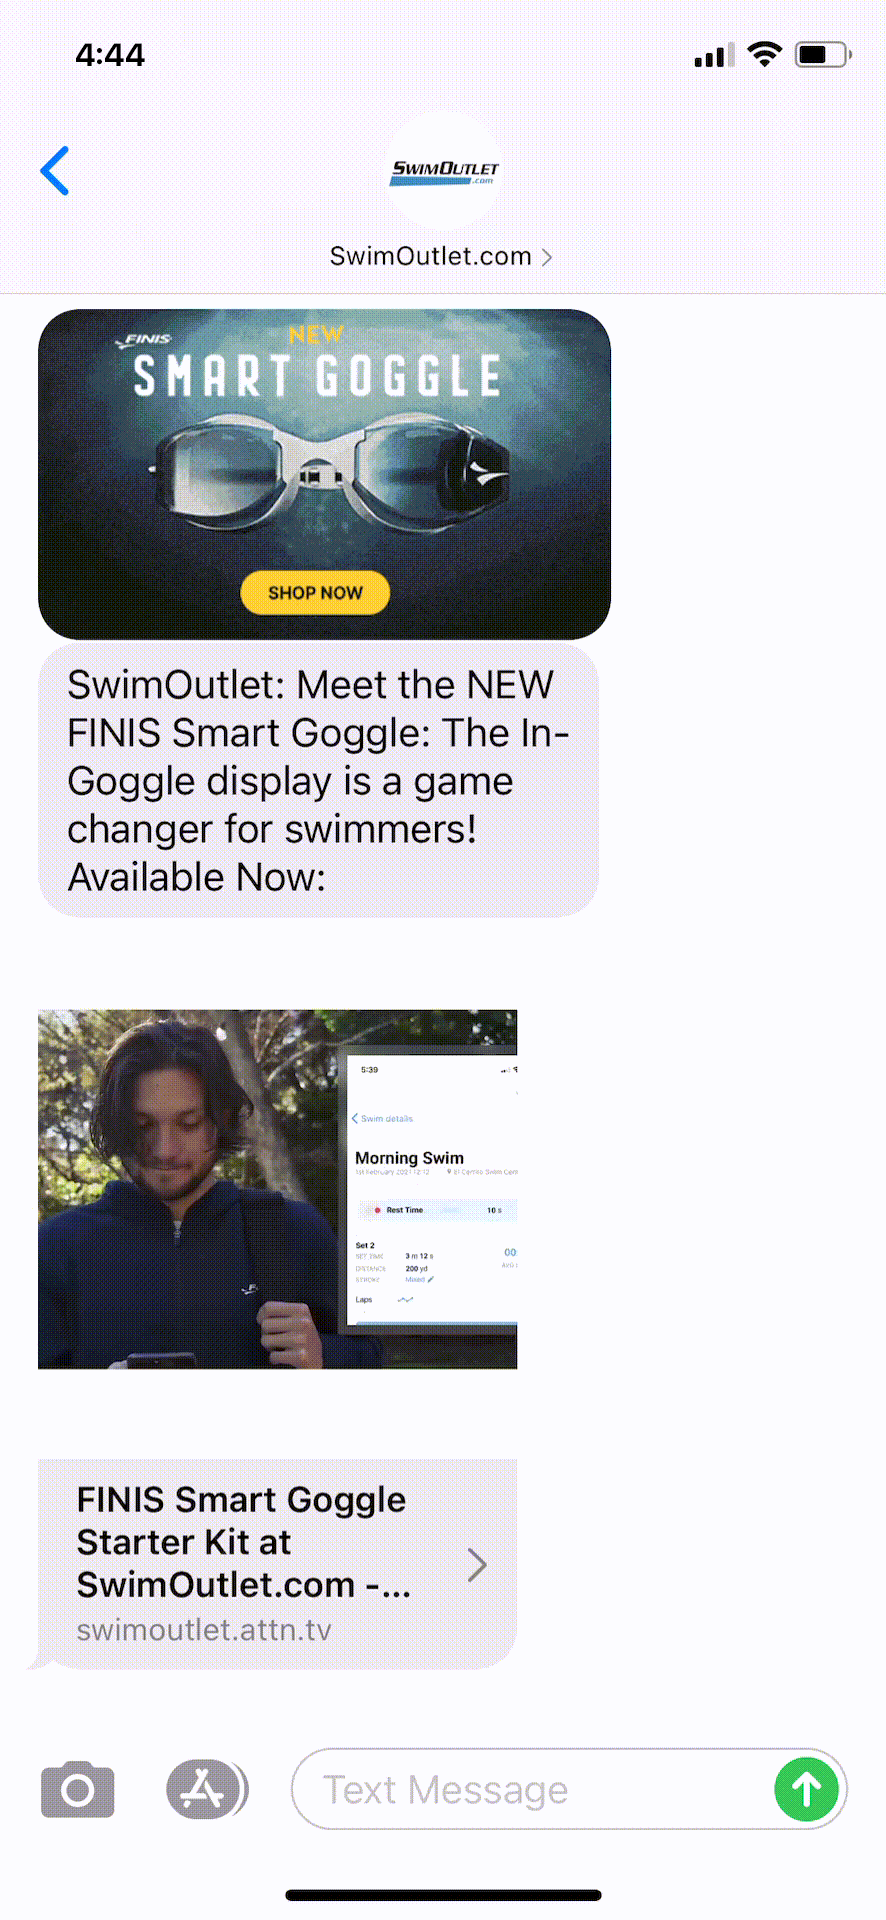 SwimOutlet.com-Text-Message-Marketing-Example-06.04.2021